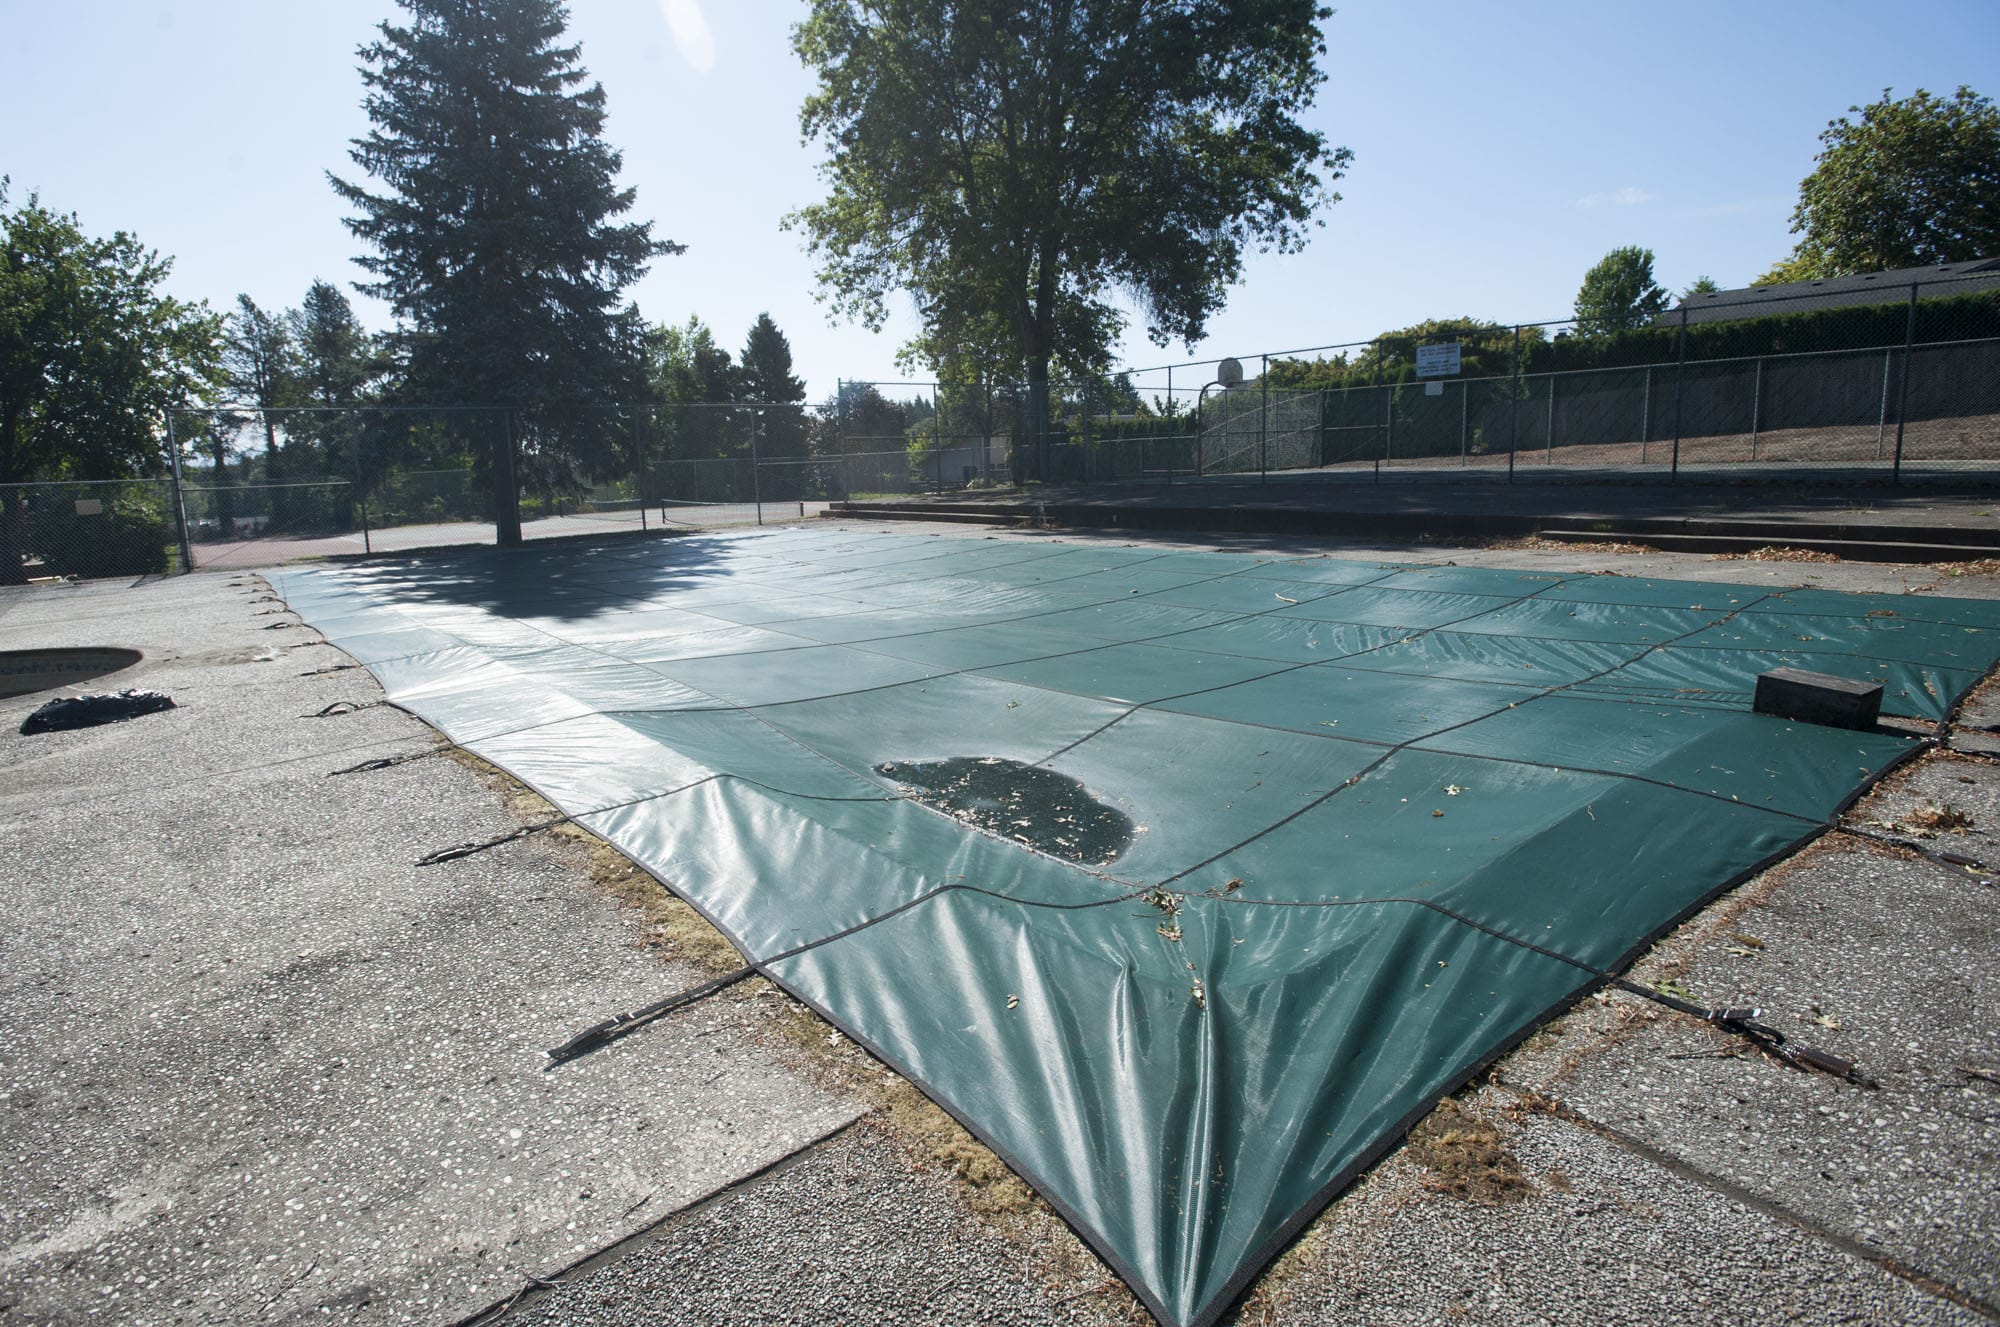 The Mount Vista neighborhood pool is seen covered and fallen in to disrepair in Ridgefield Thursday July 23, 2015.  The board  of the  Mount Vista Homeowners Association voted to decommission the pool, after the health department said it has pathogens, but some neighbors disagree.